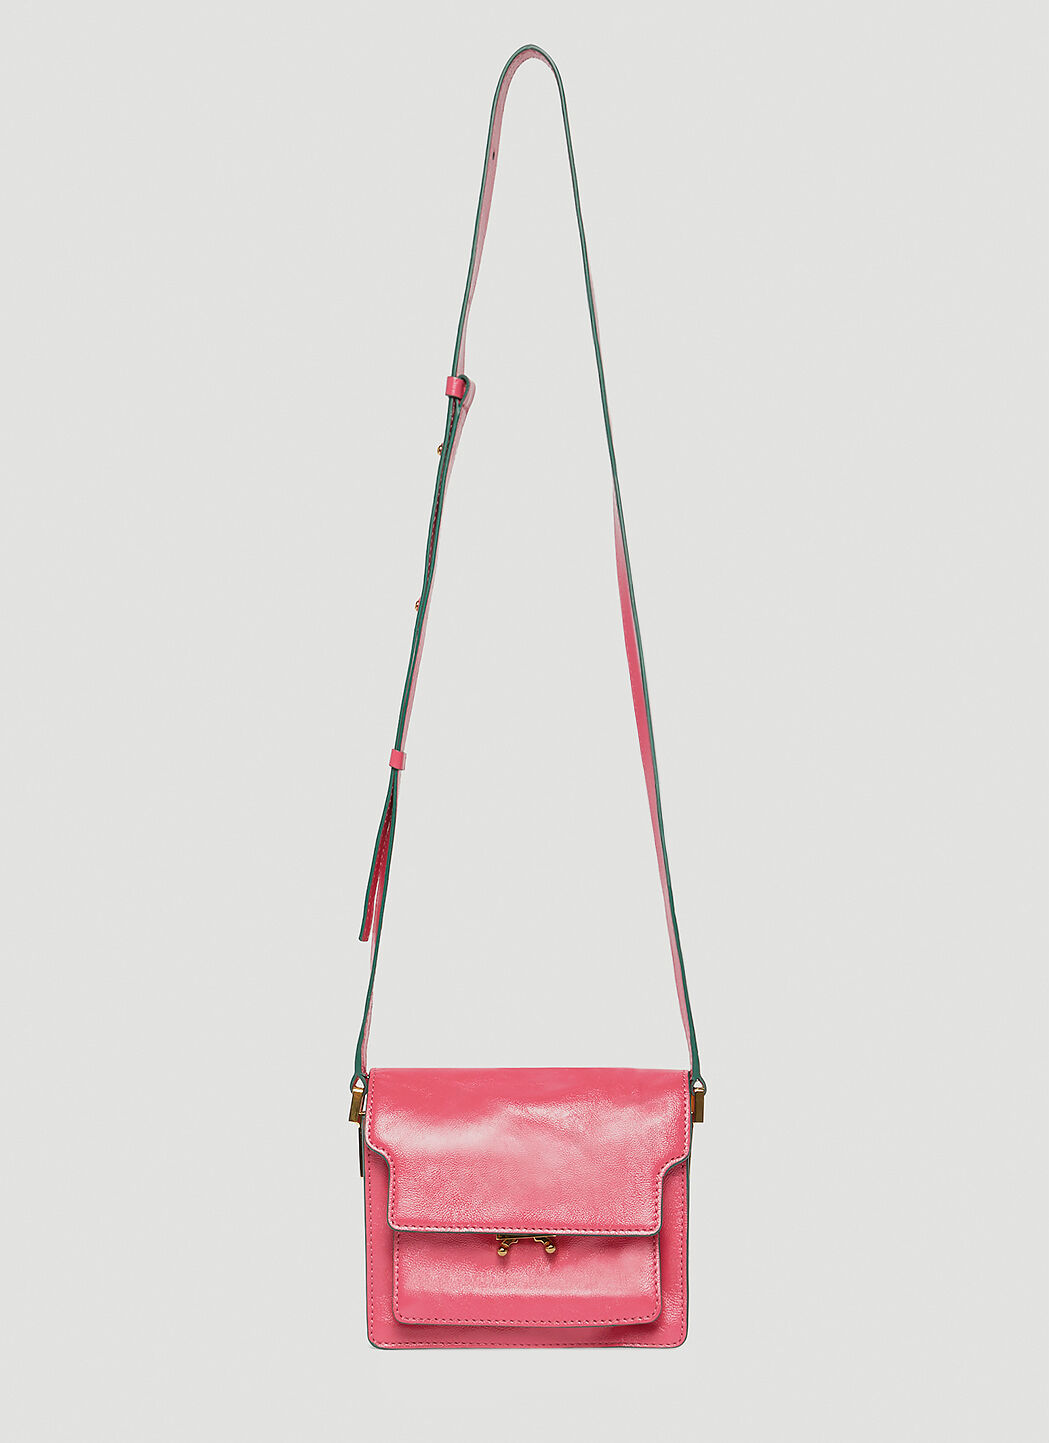 Marni Women's Trunk Small Soft Shoulder Bag in Pink | LN-CC®